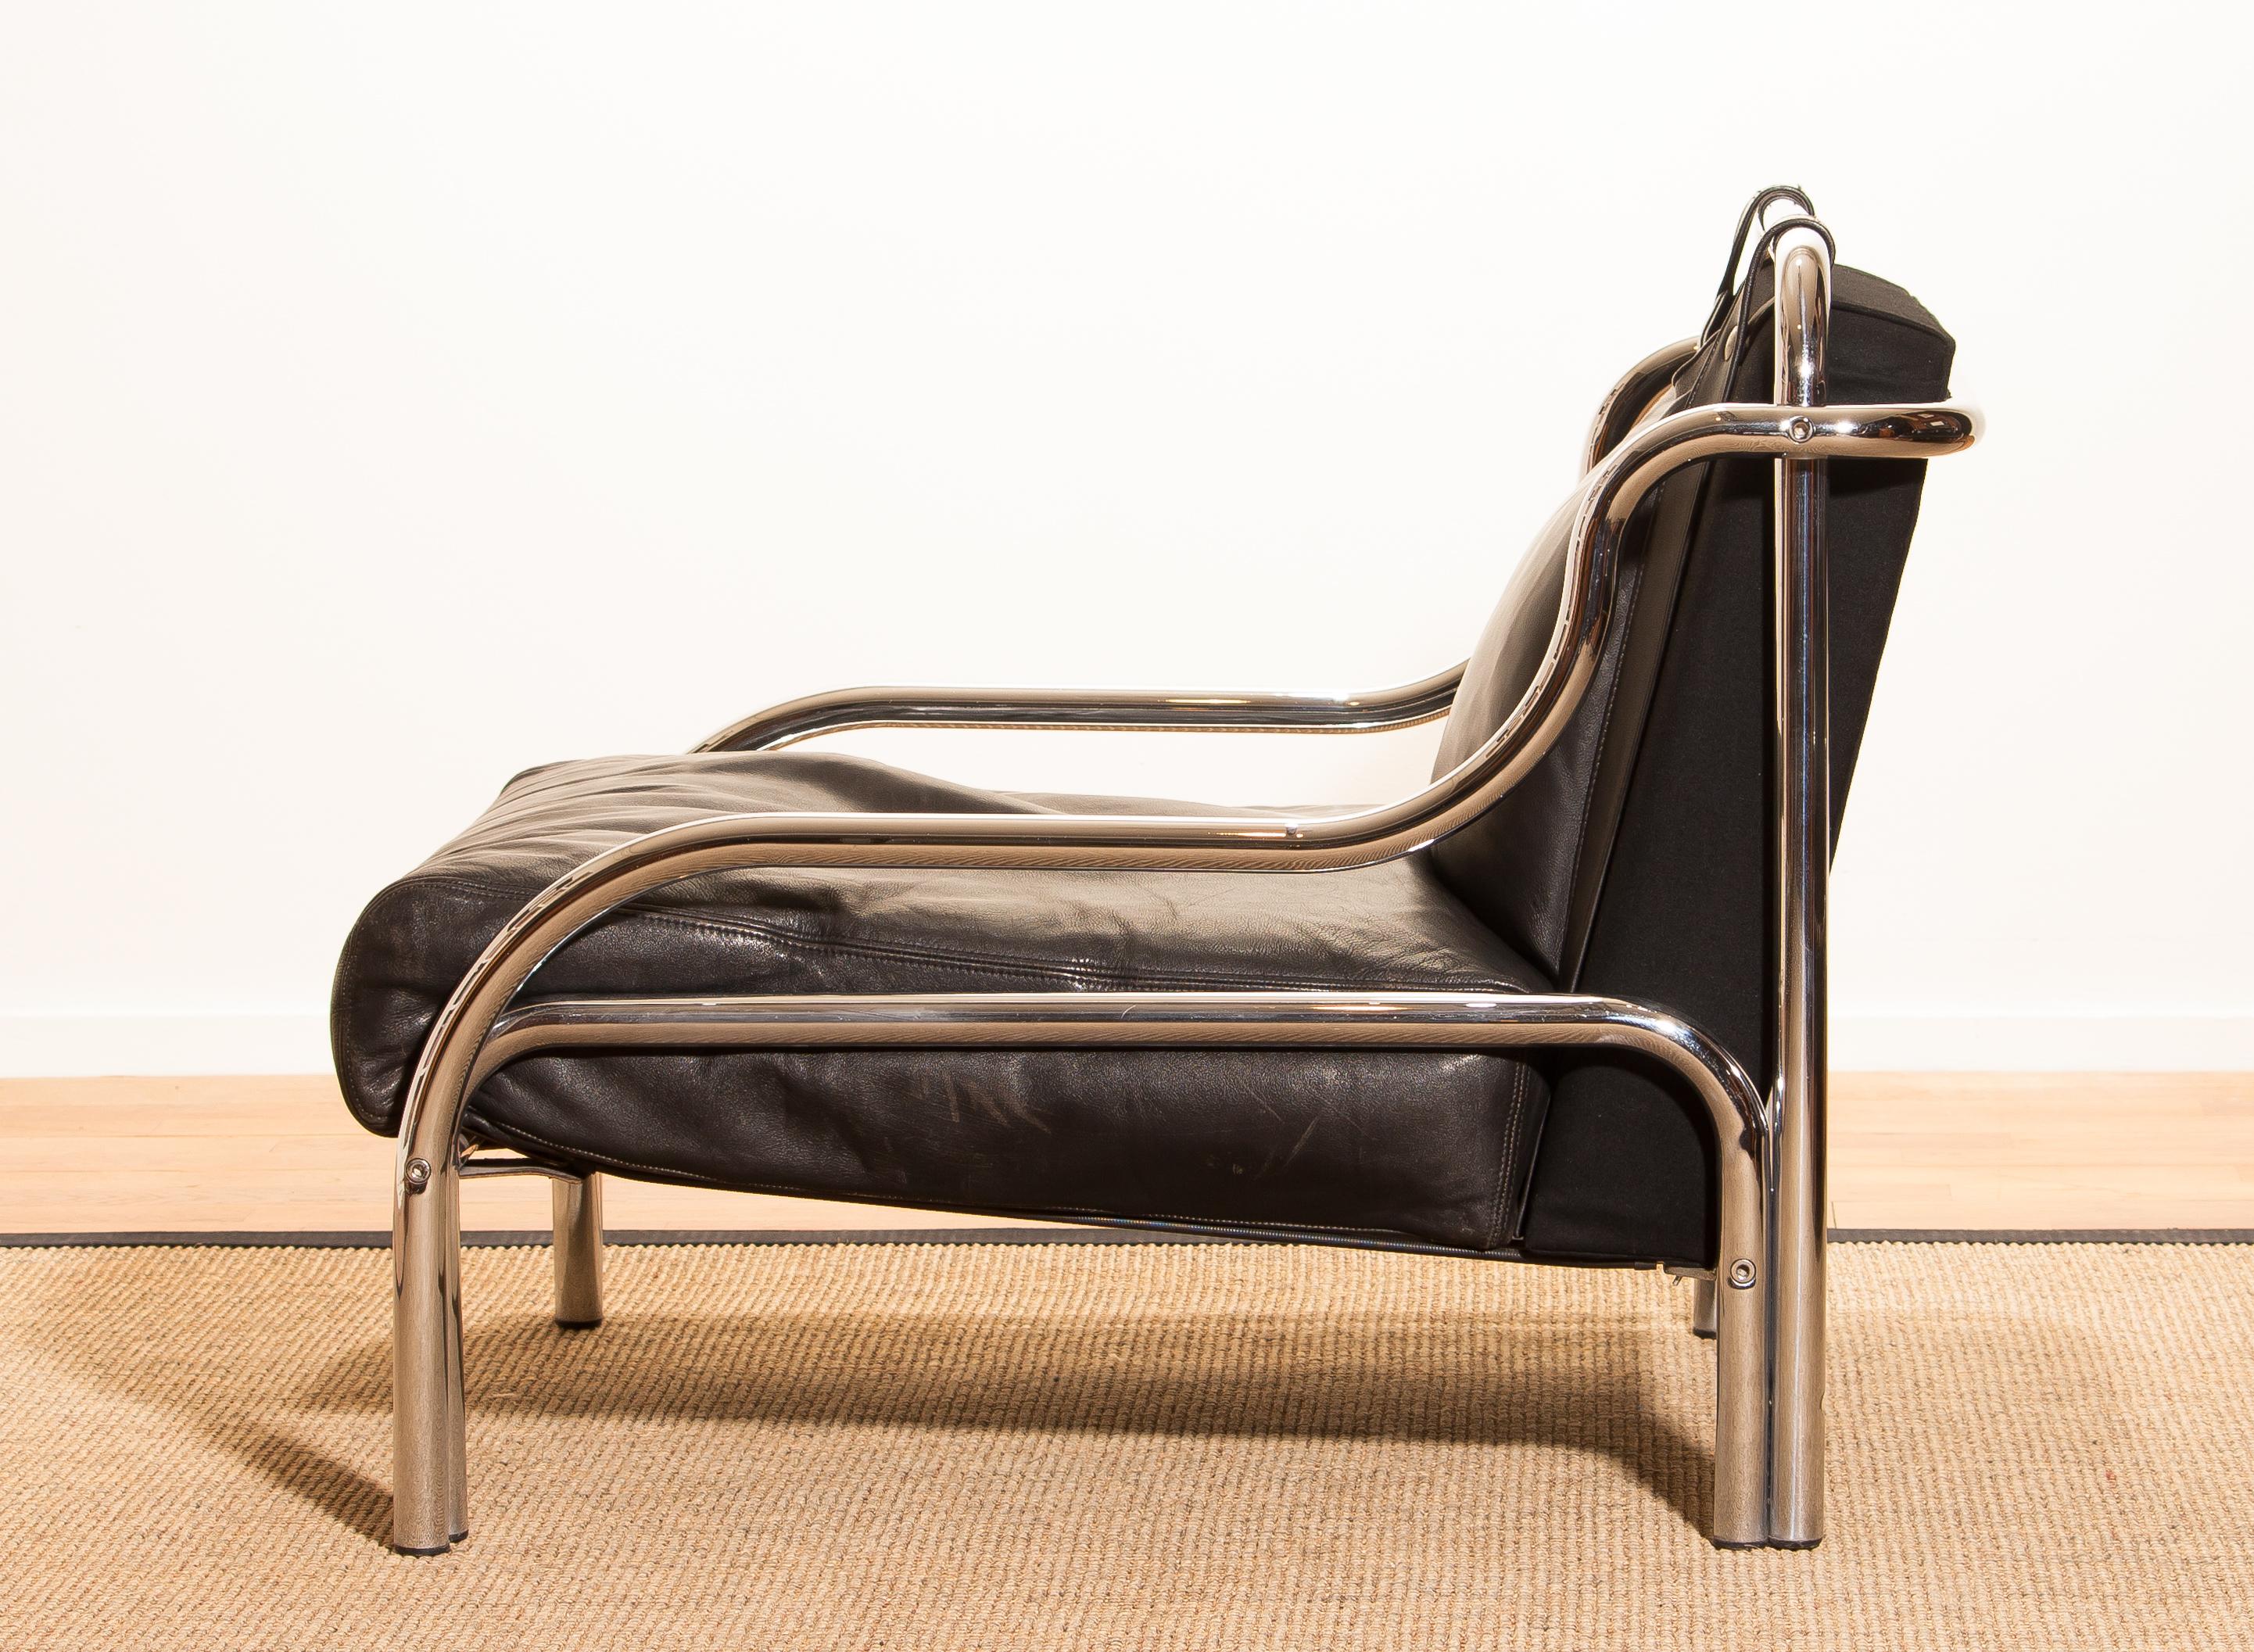 1960s, Leather and Chrome Lounge Chair by Gae Aulenti for Poltronova 3